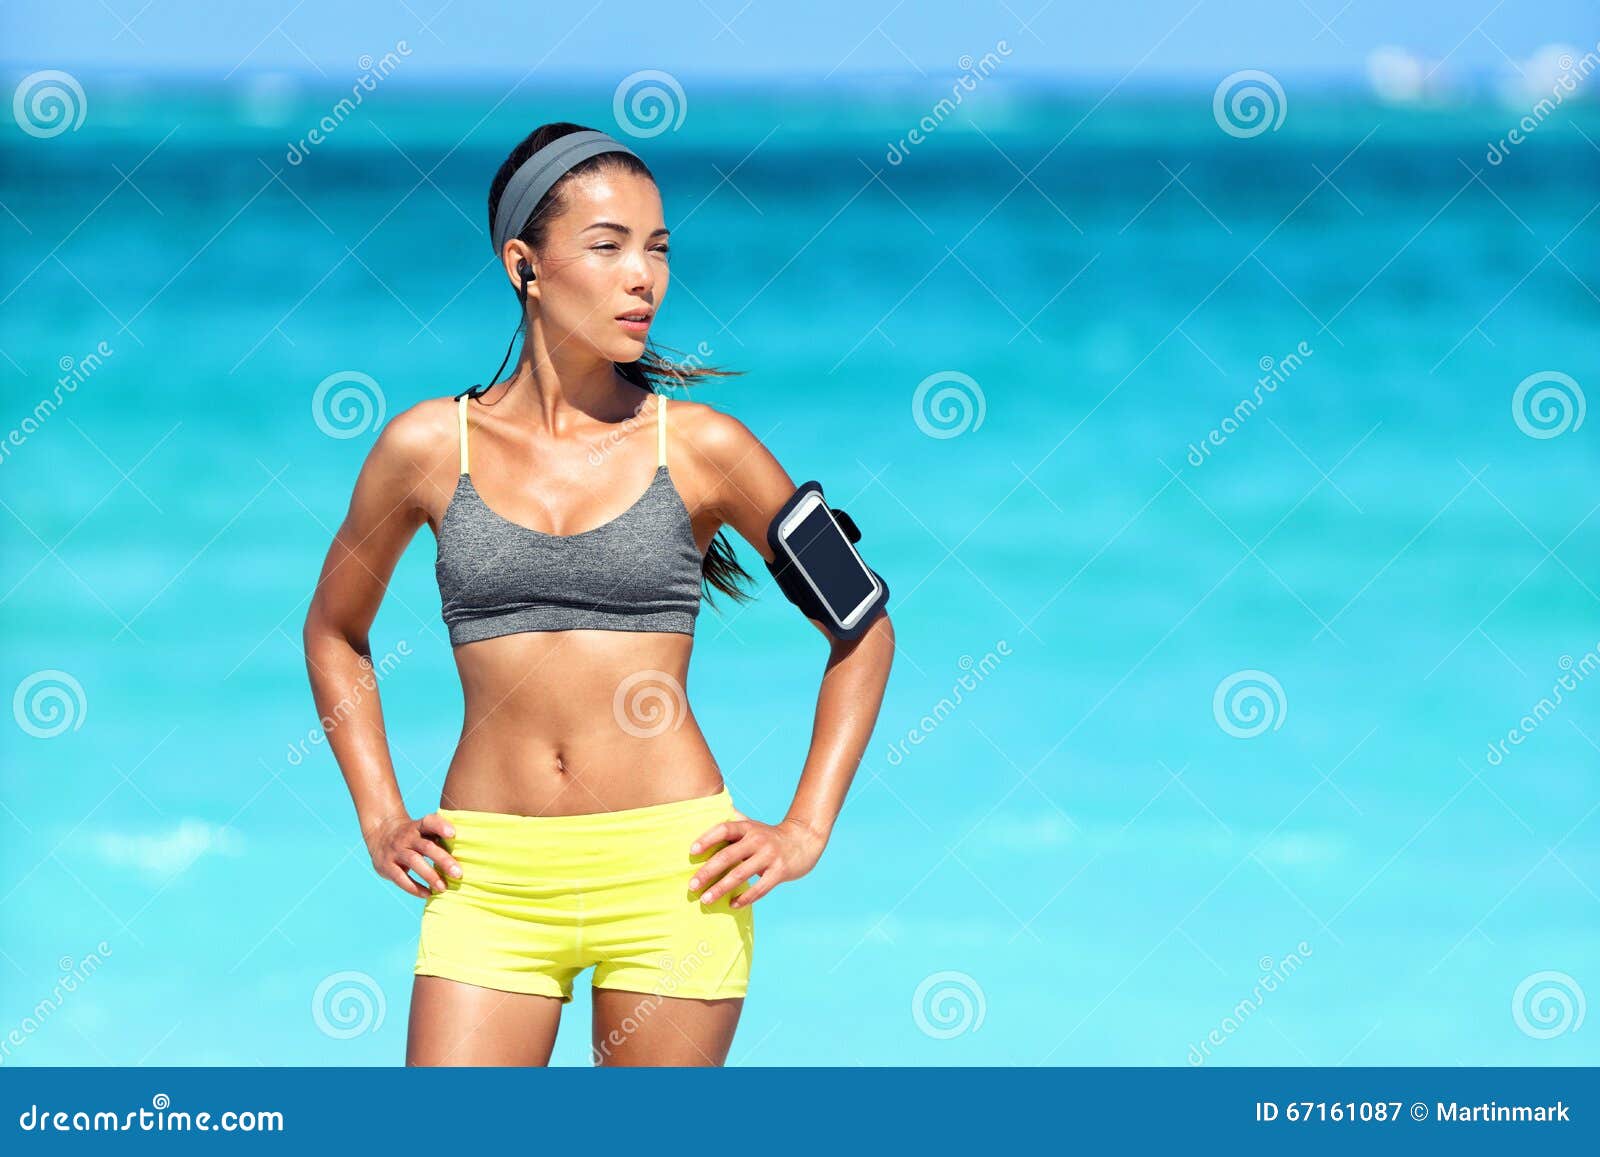 Healthy beautiful young Asian runner woman in sports clothing